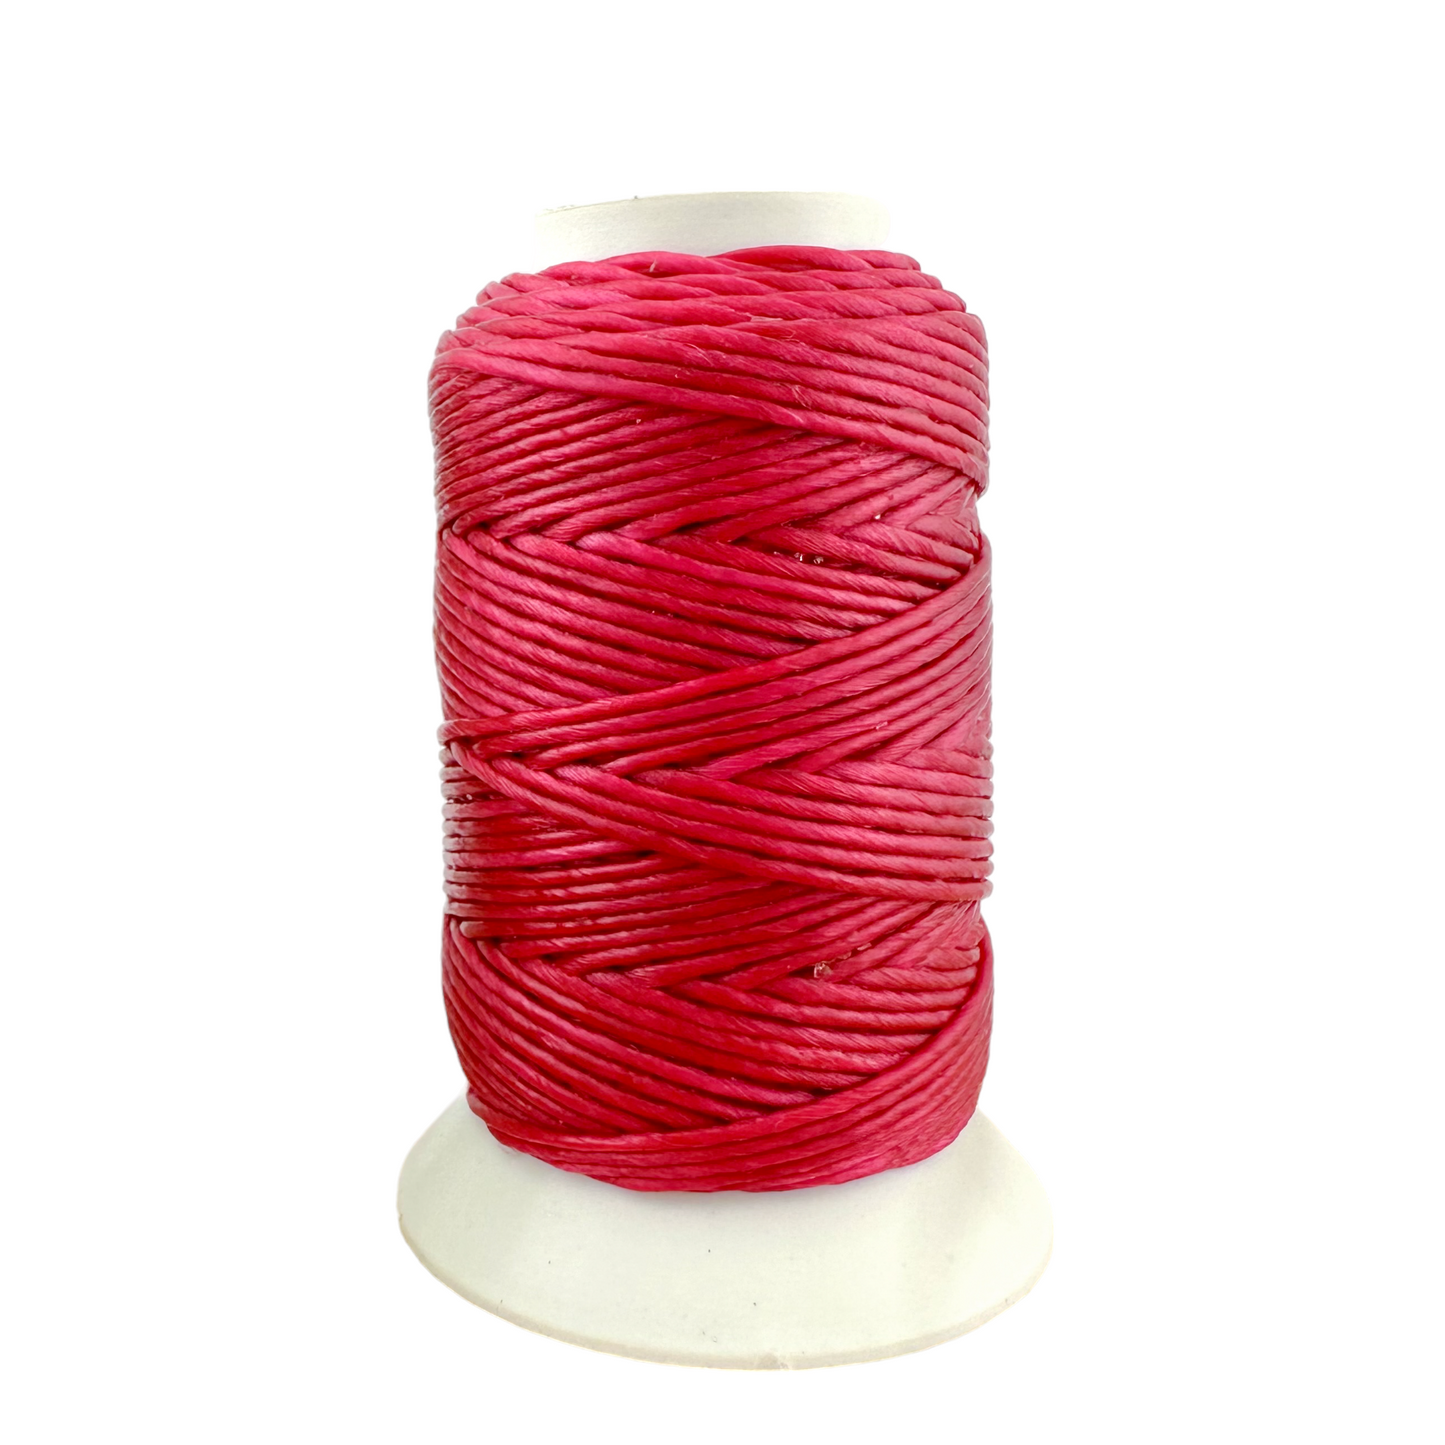 Waxed Macrame Cord 1mm - Small Spool 30 meters - Gypsy Pink